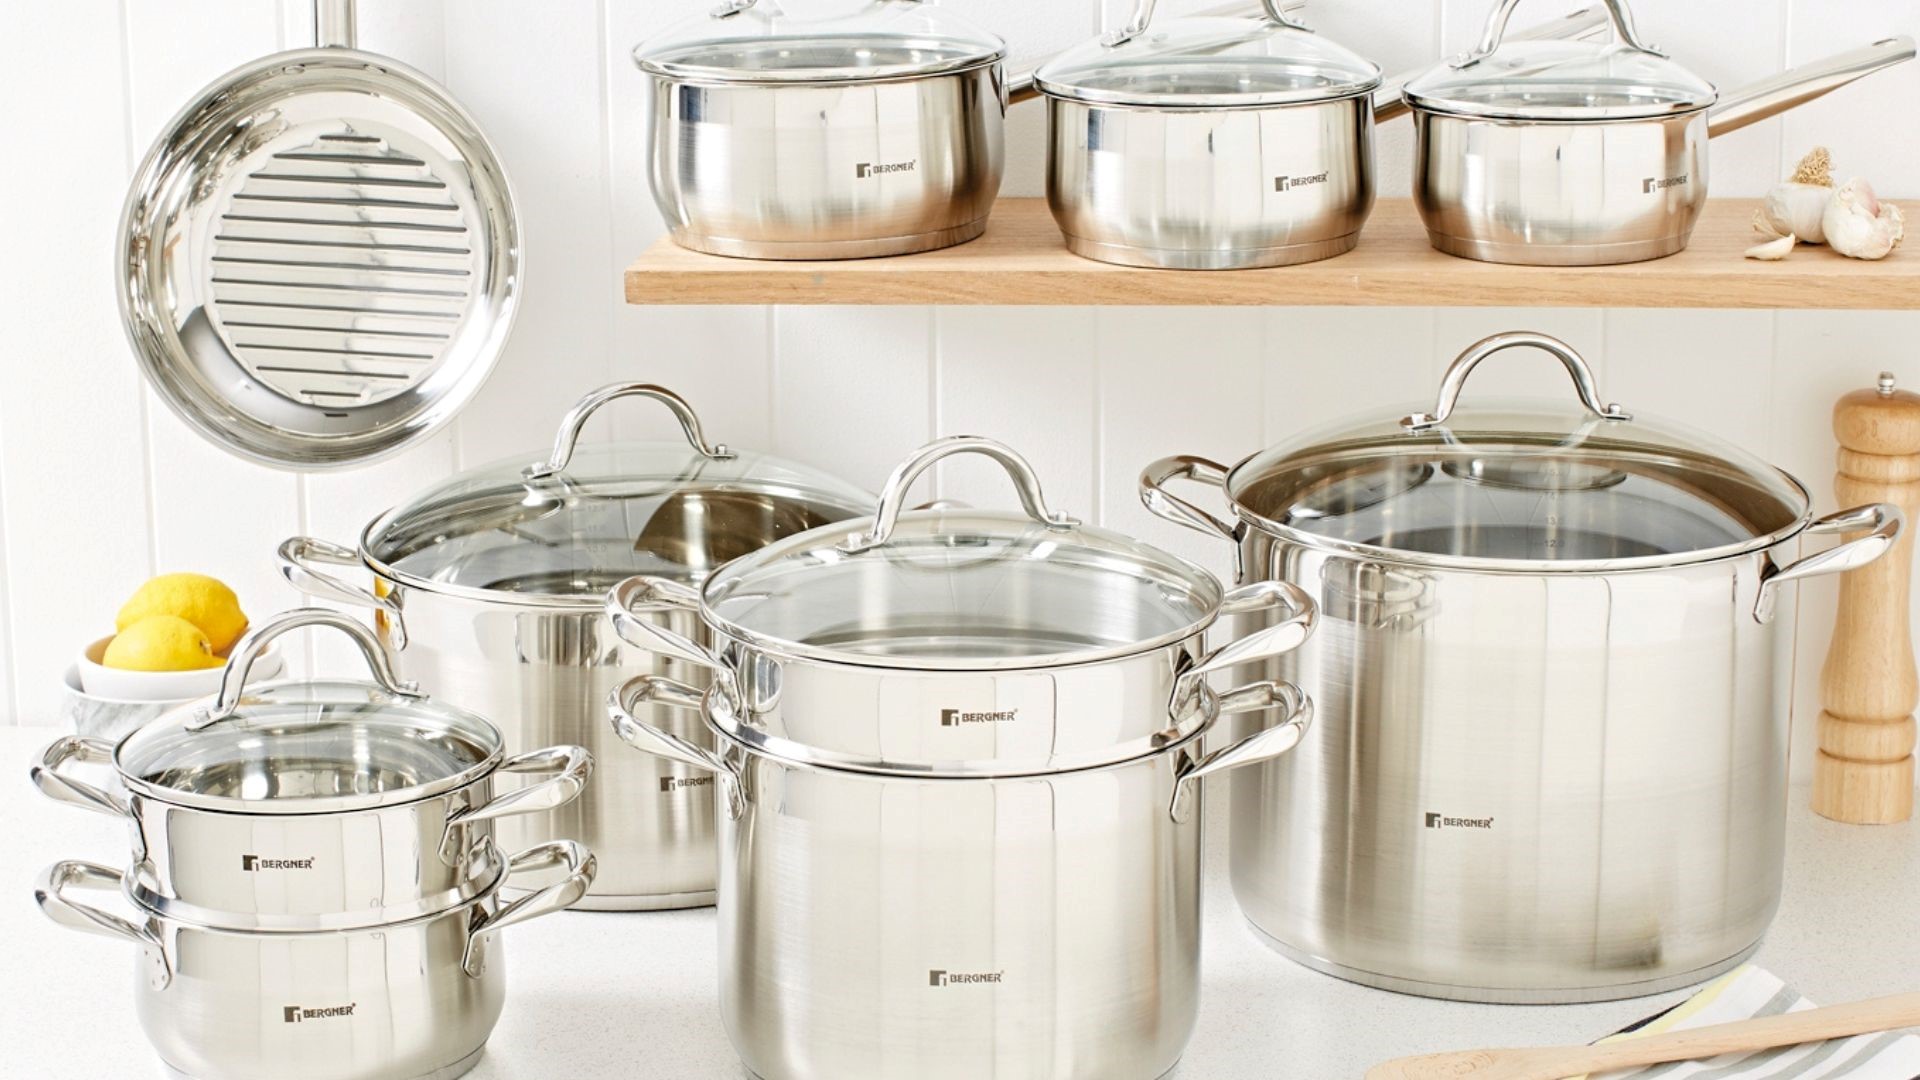 Bergner Gourmet Stainless Steel Induction Stockpots, Casserole, Saucepans and Steamsets